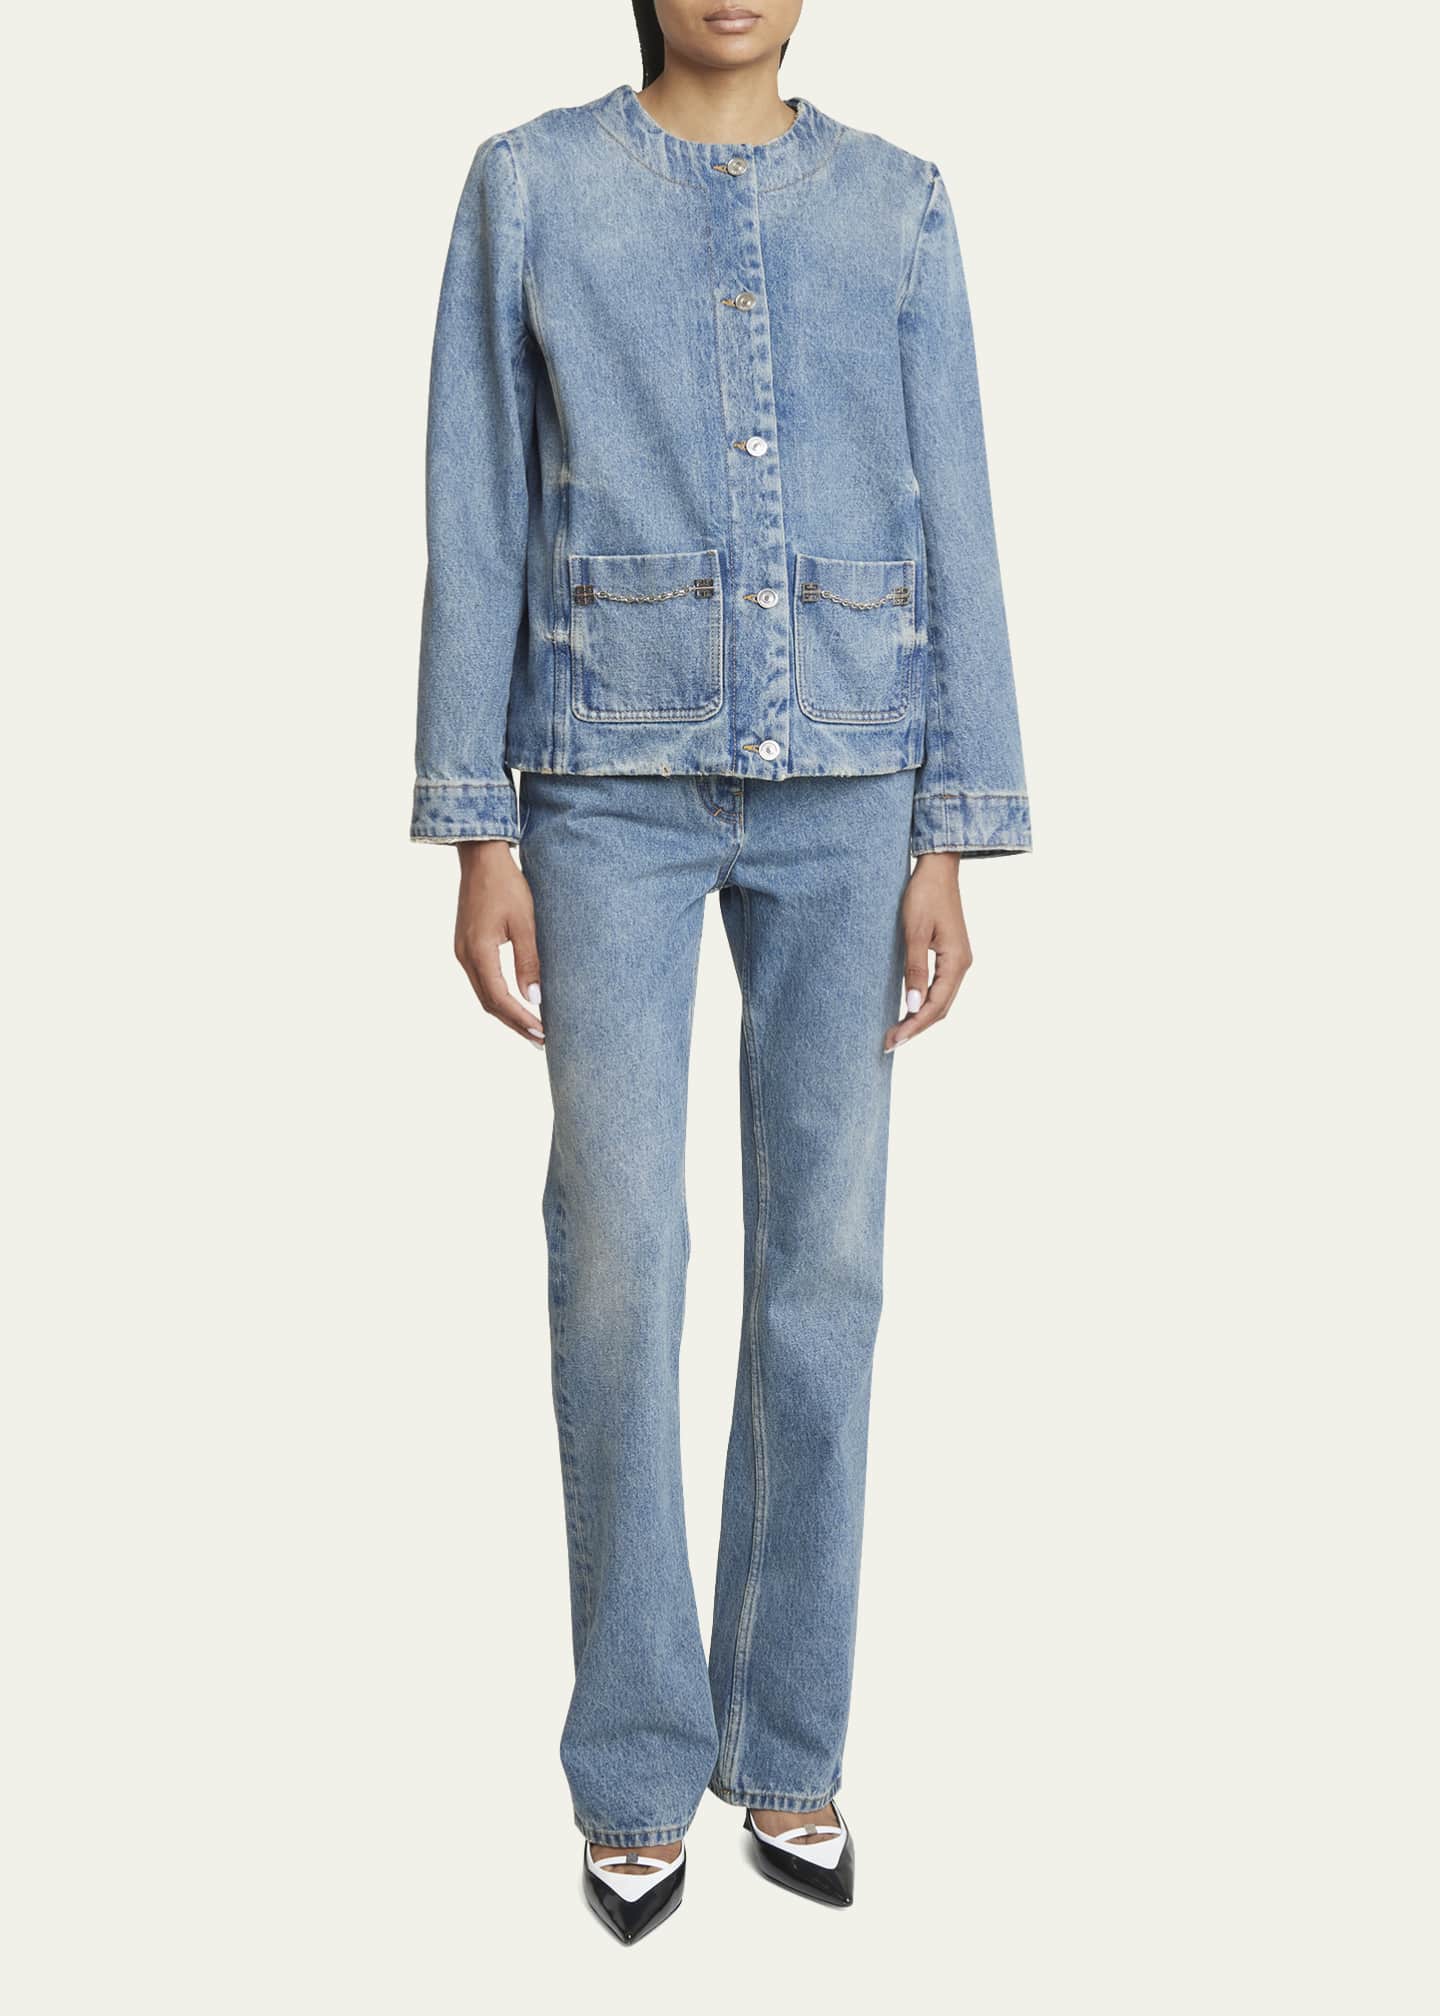 Givenchy Bootcut Jeans with 4G Chain Detail - Bergdorf Goodman